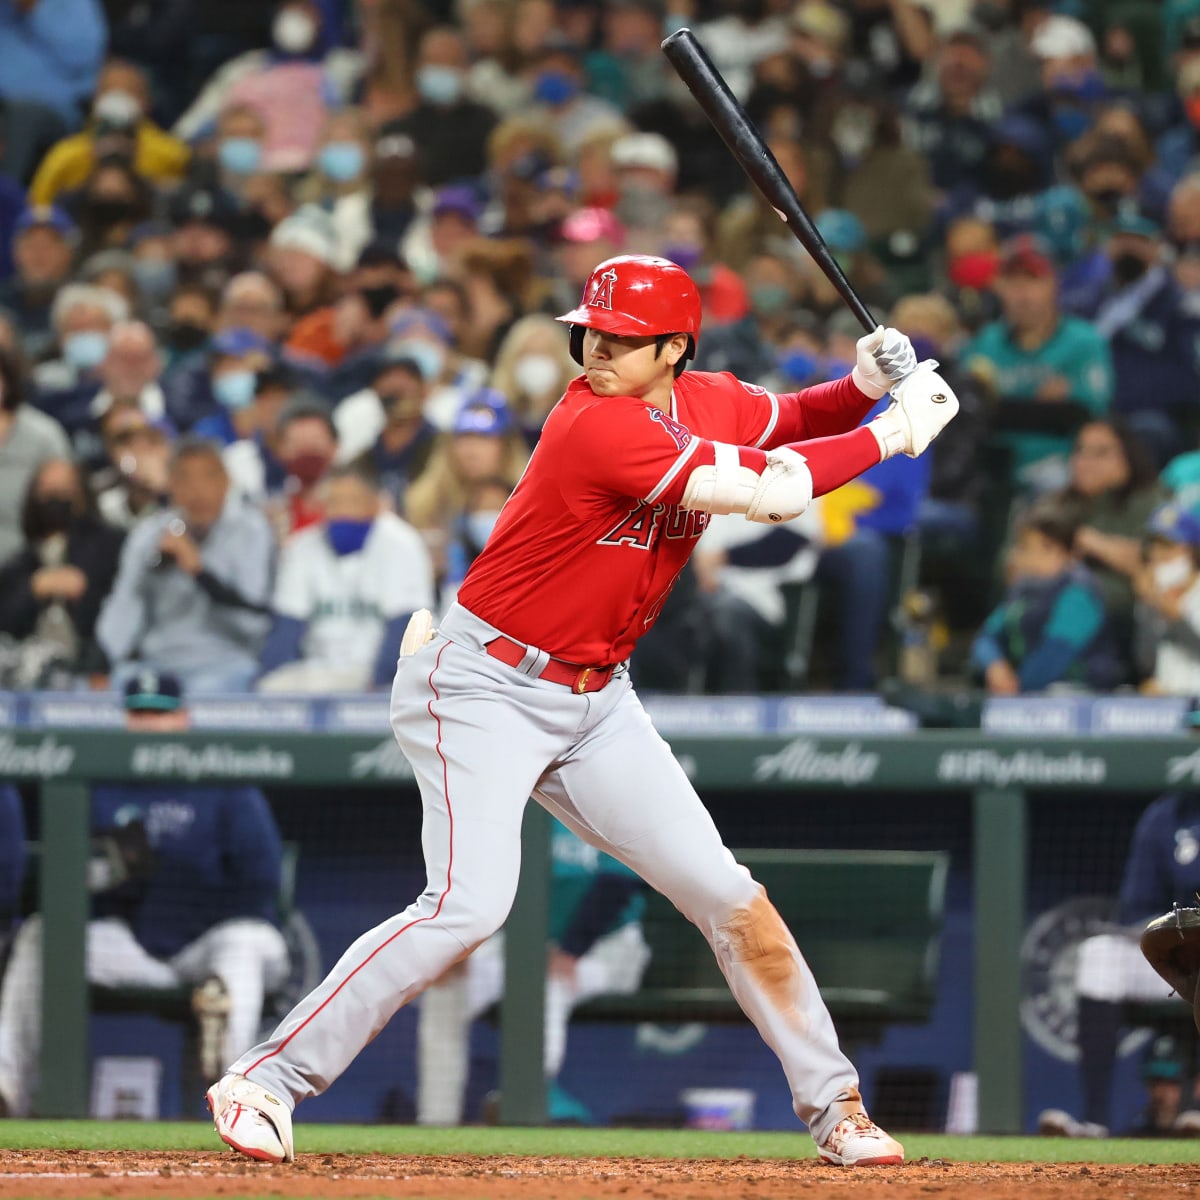 MLB The Show 22 Cover Athlete is Shohei Ohtani, Features Revealed